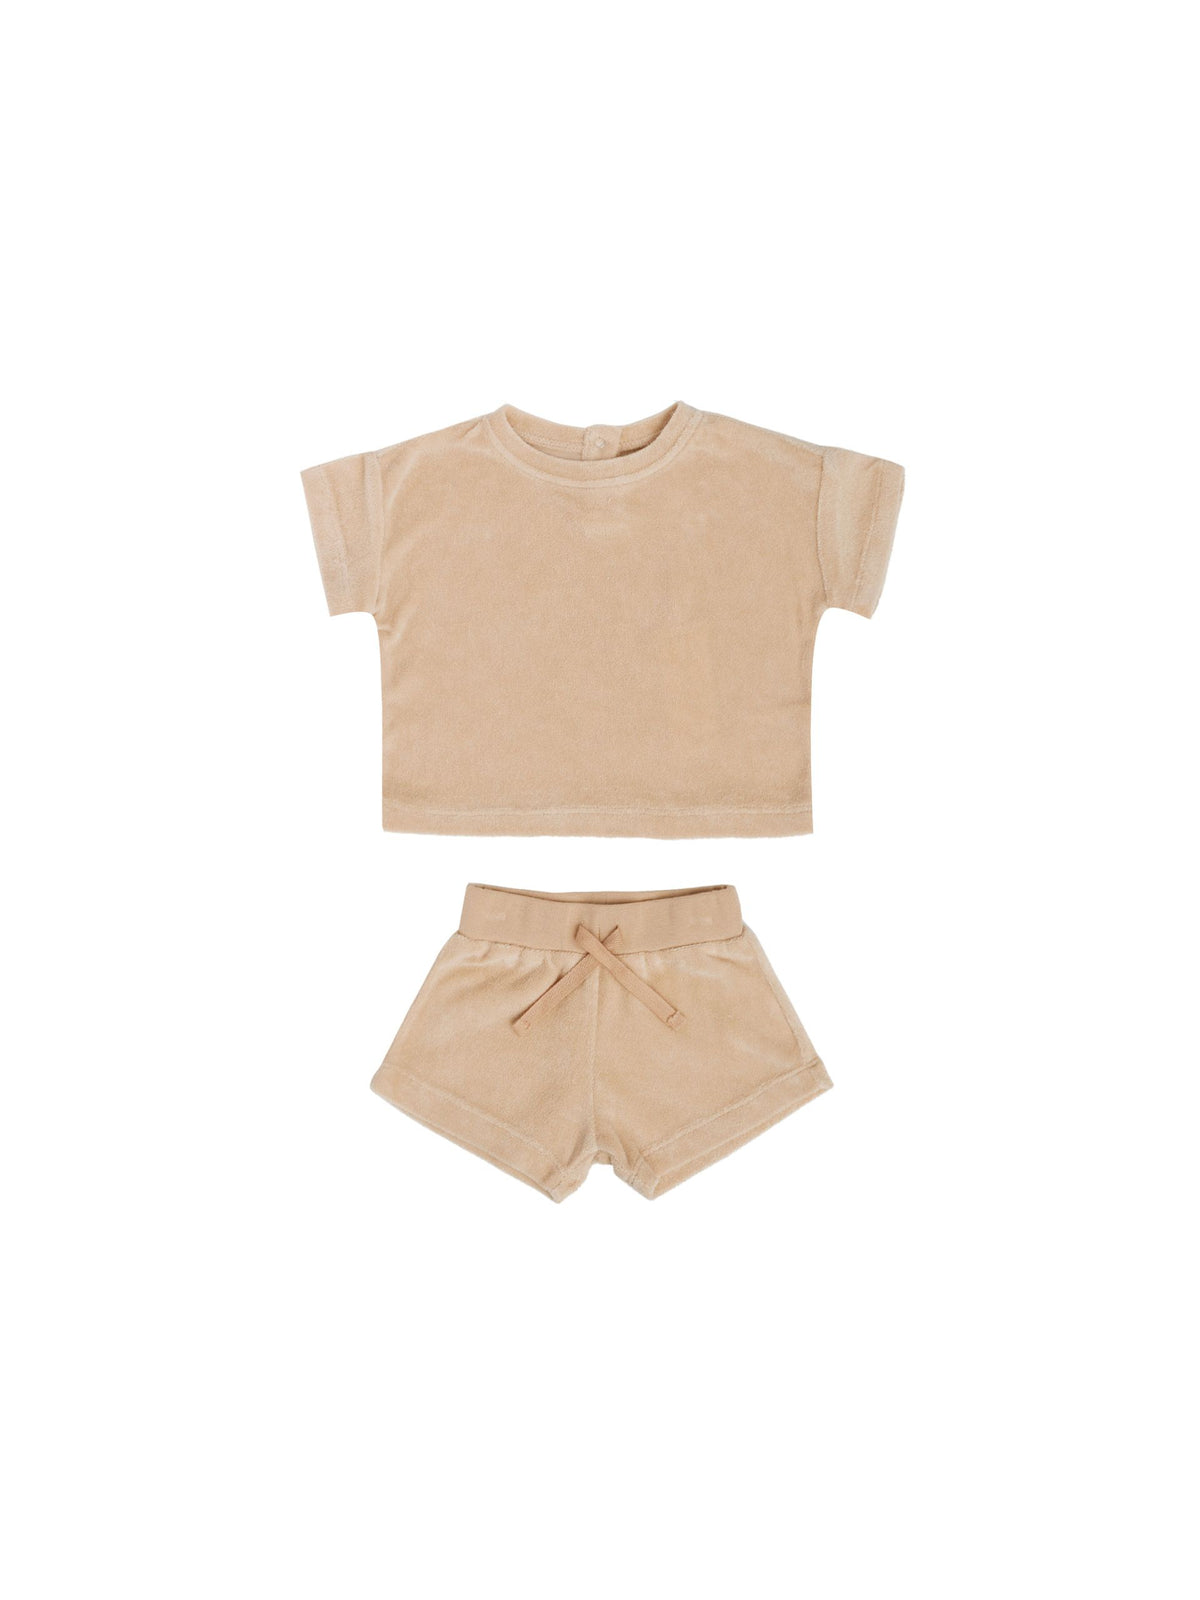 Terry Tee & Short Set - Apricot